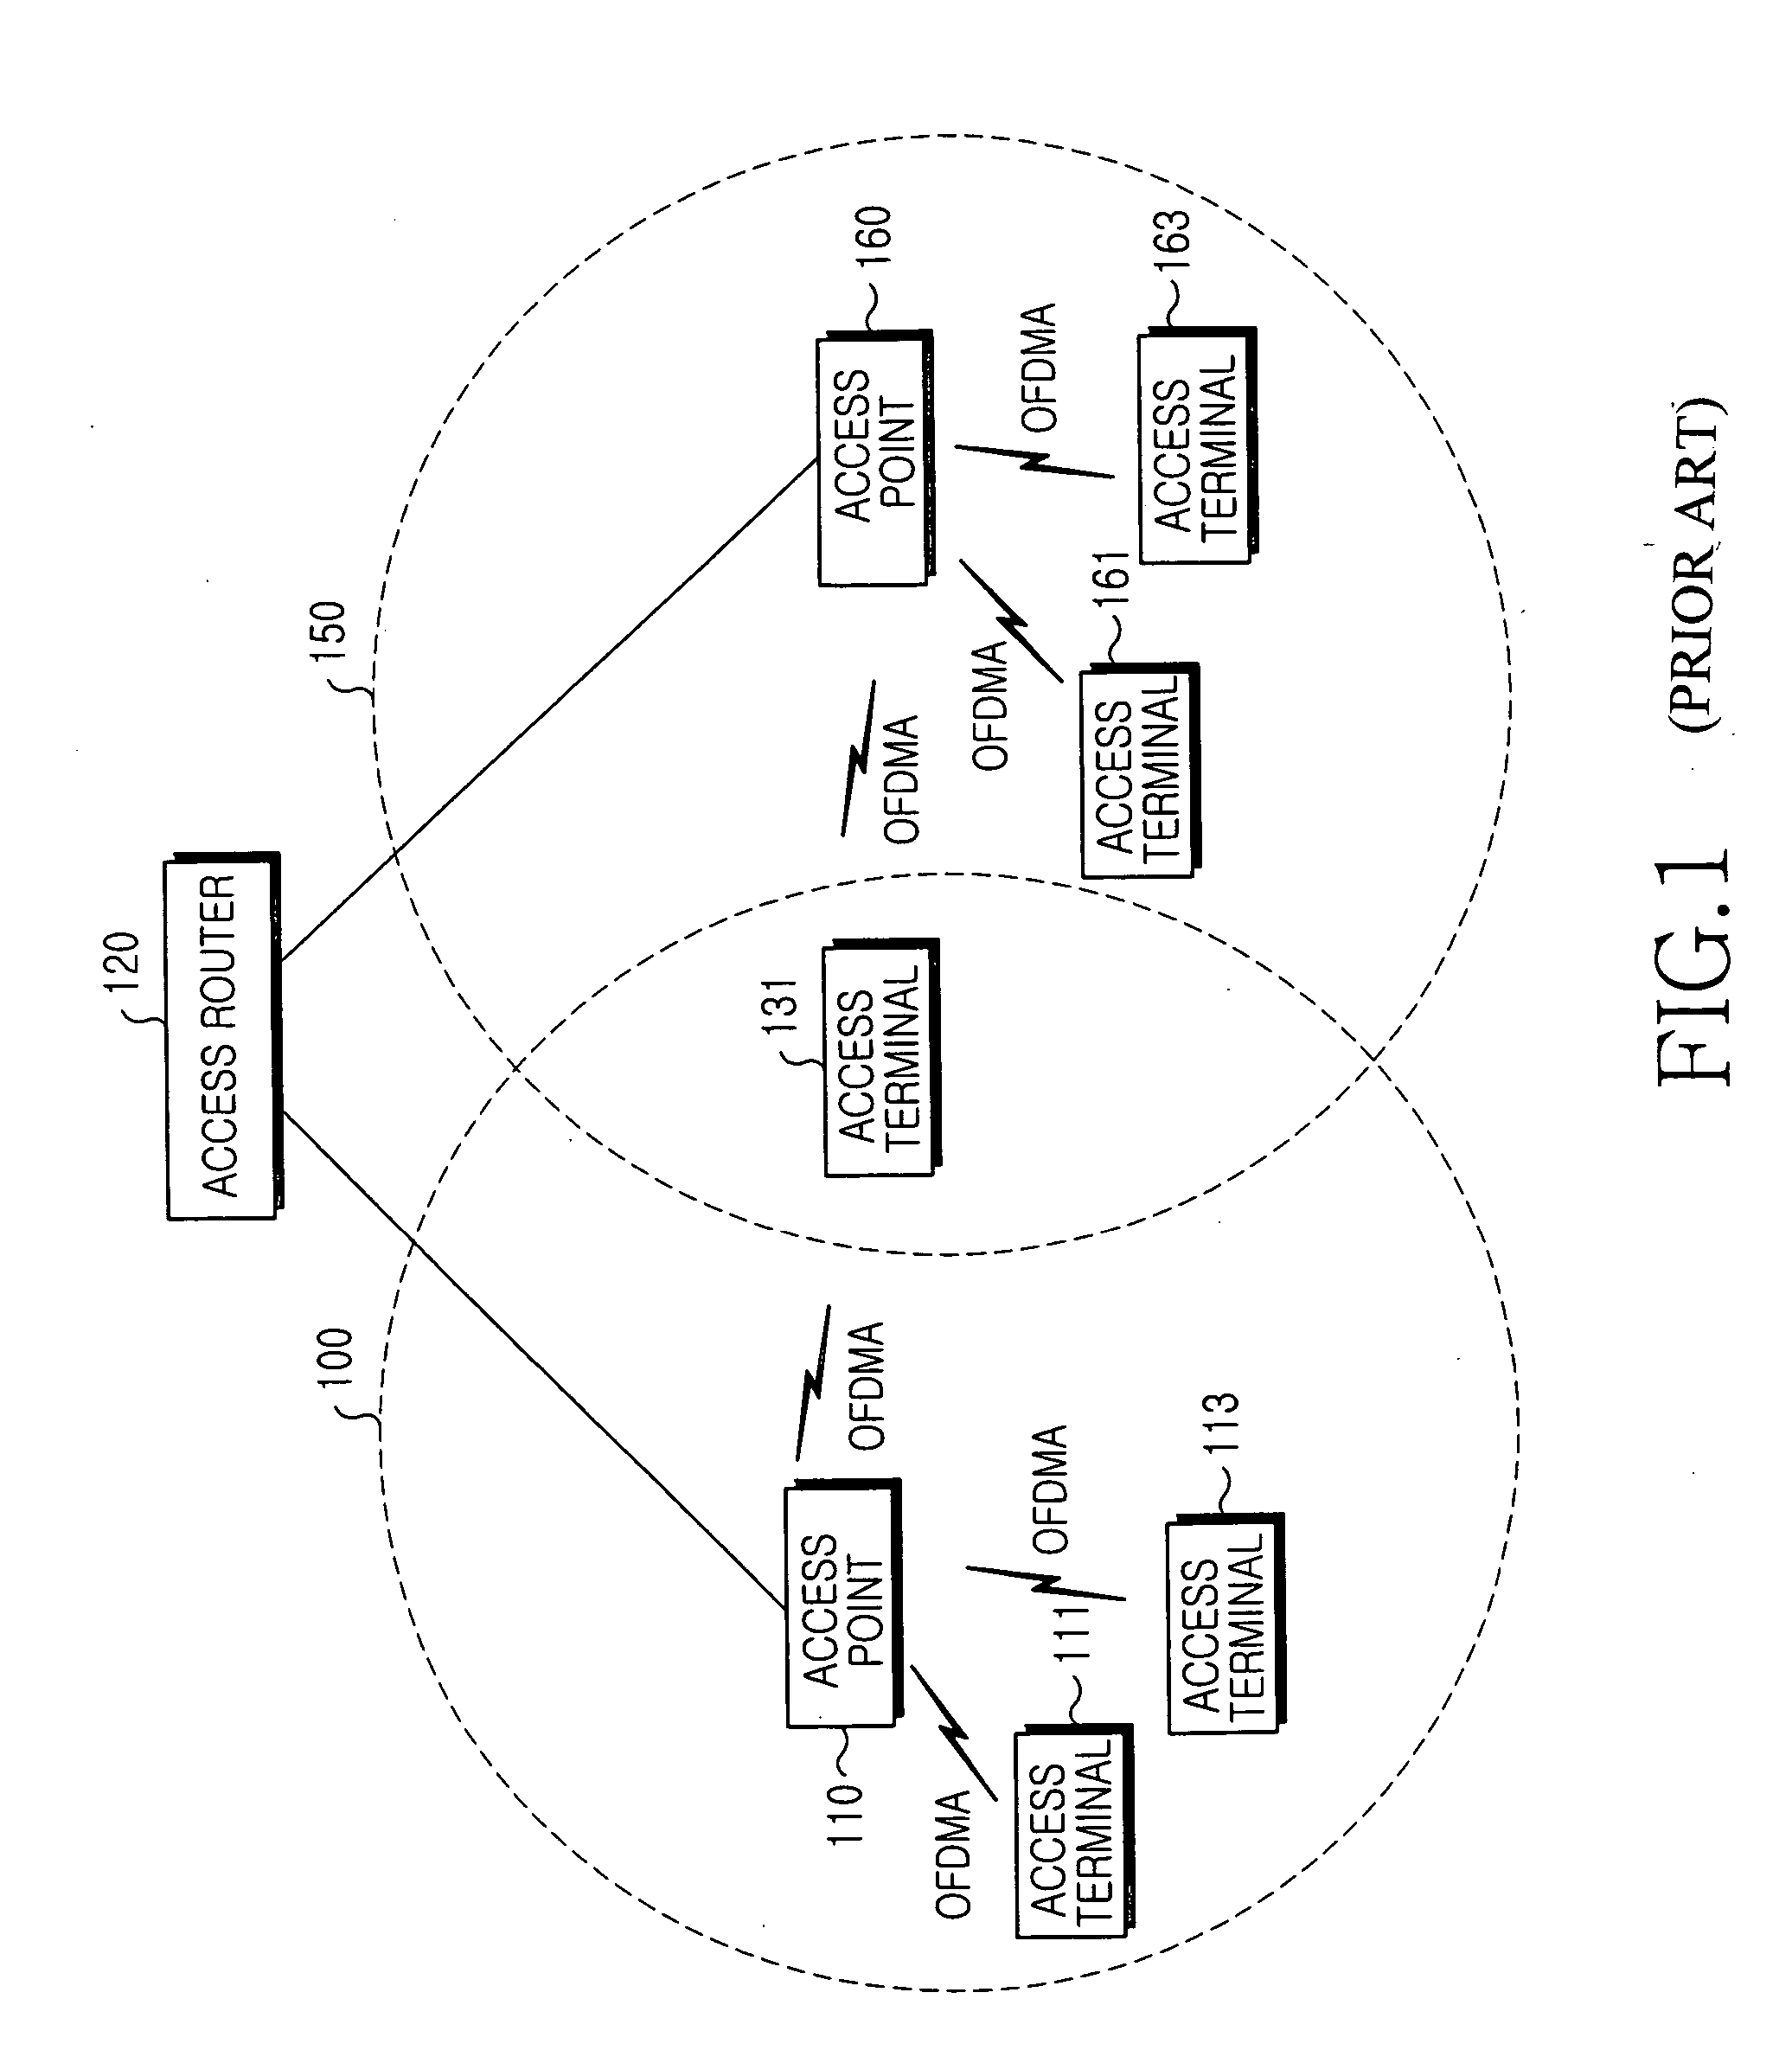 System and mehtod for dynamically allocating resources in a mobile communication system employing orthogonal frequency division multiple access